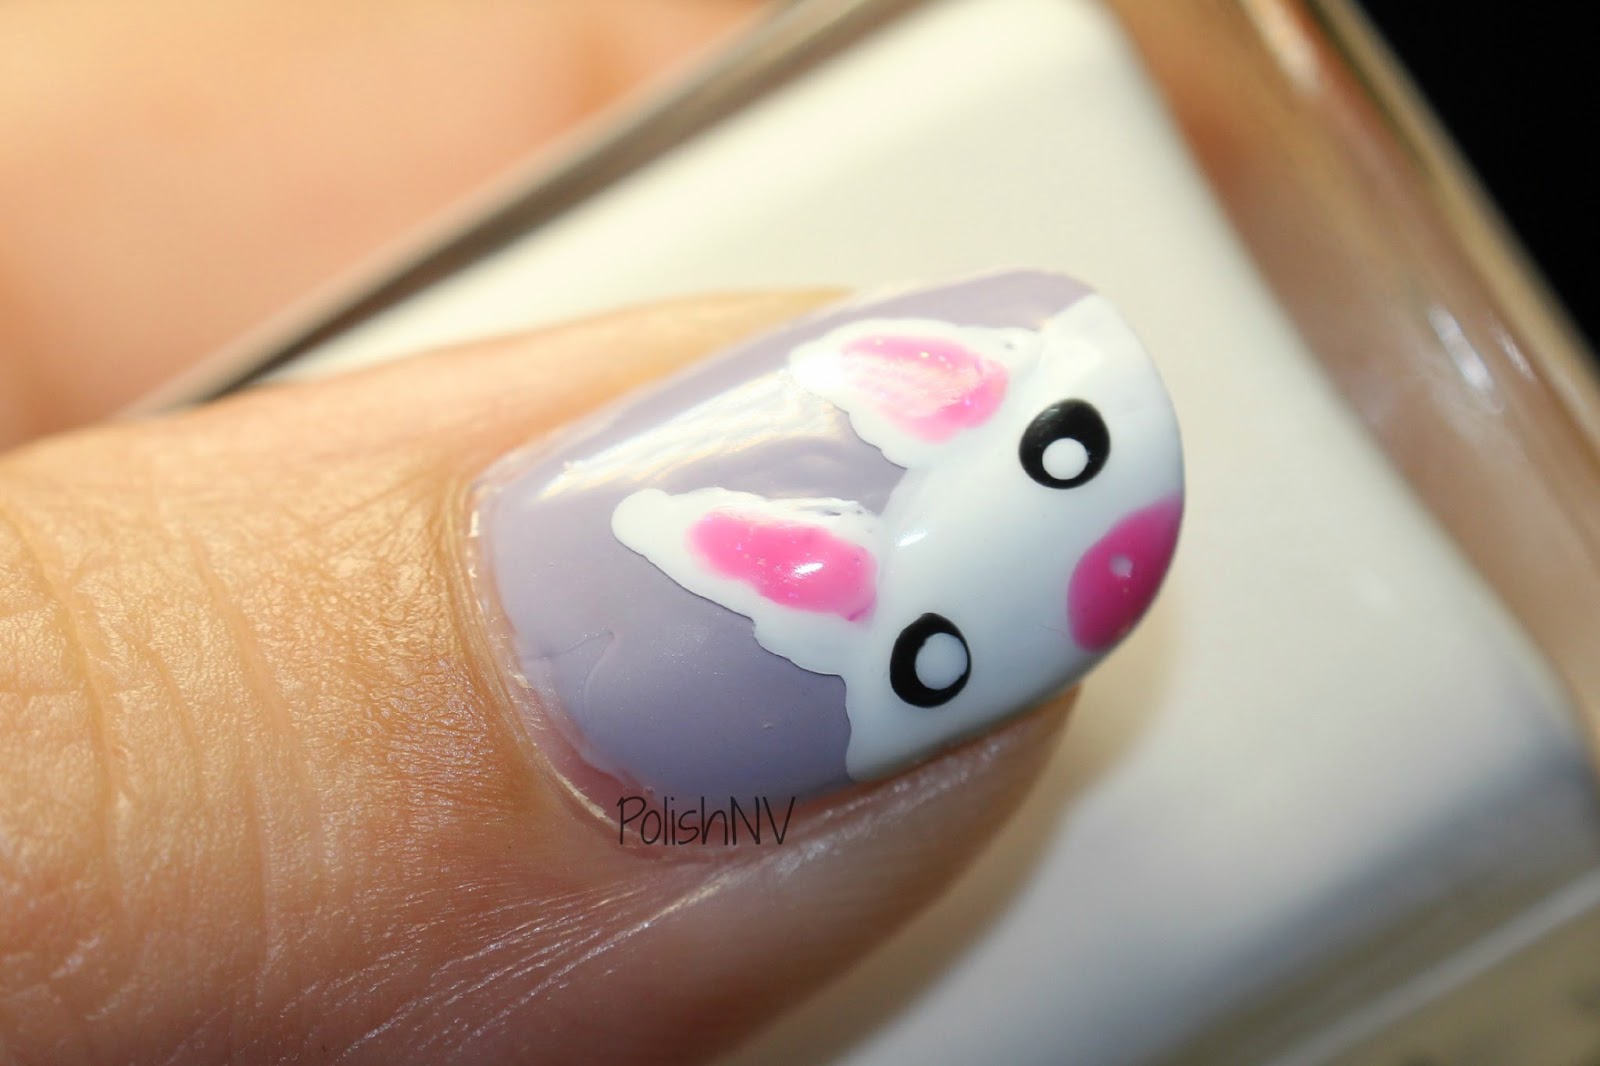 8. Easter Bunny Nail Art on Pinterest - wide 3